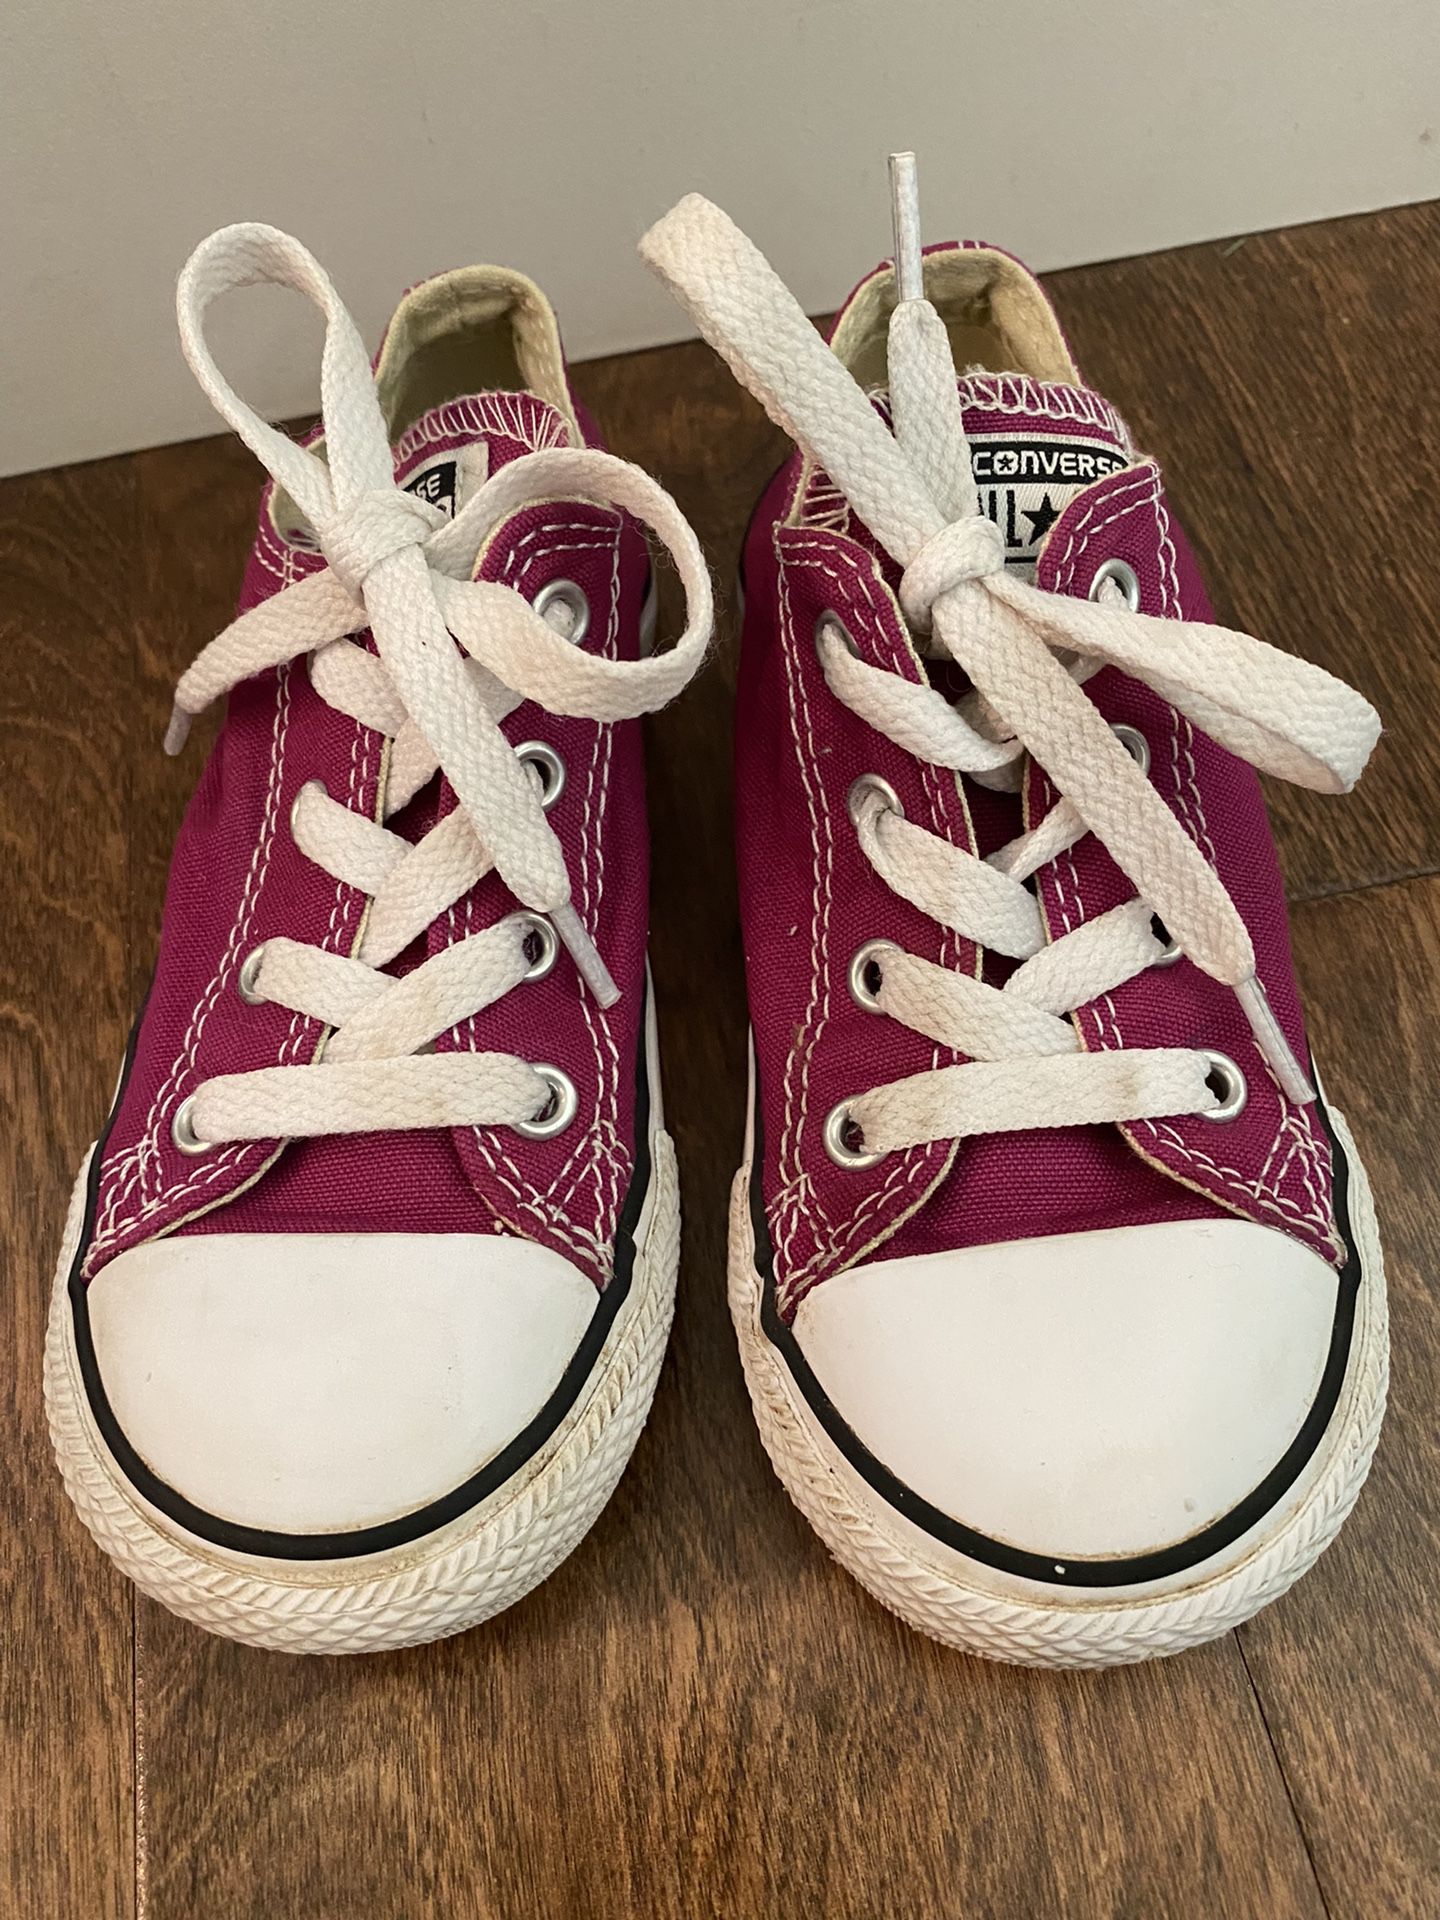 Purple Converse Shoes Size Sale in West Linn, OR - OfferUp